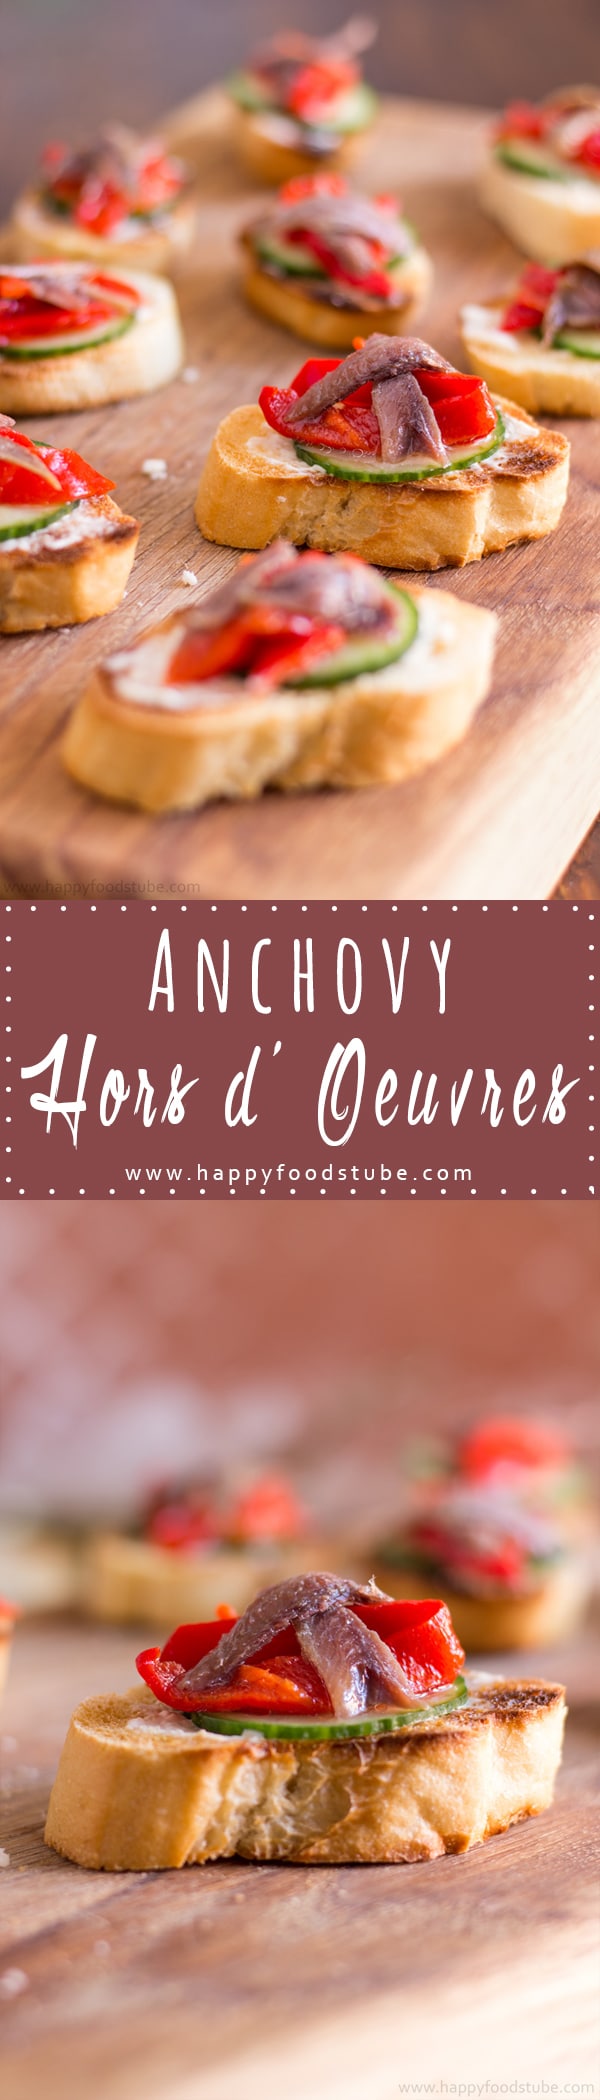 Anchovy-Hors-d’-Oeuvres-Recipe